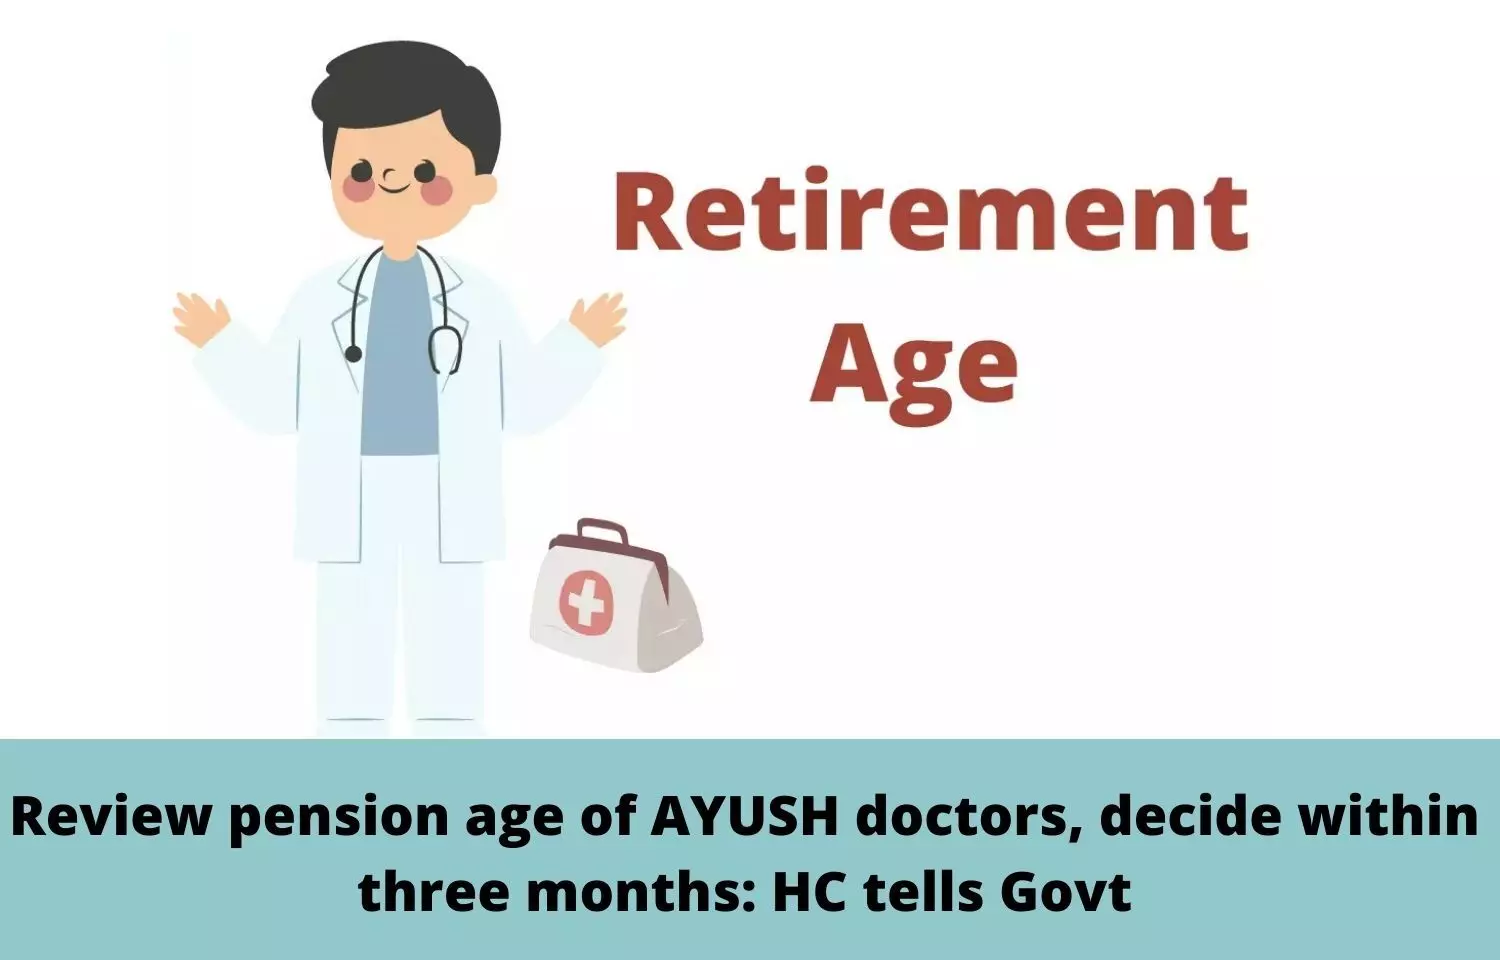 HC directs Govt to review pension age of AYUSH doctors